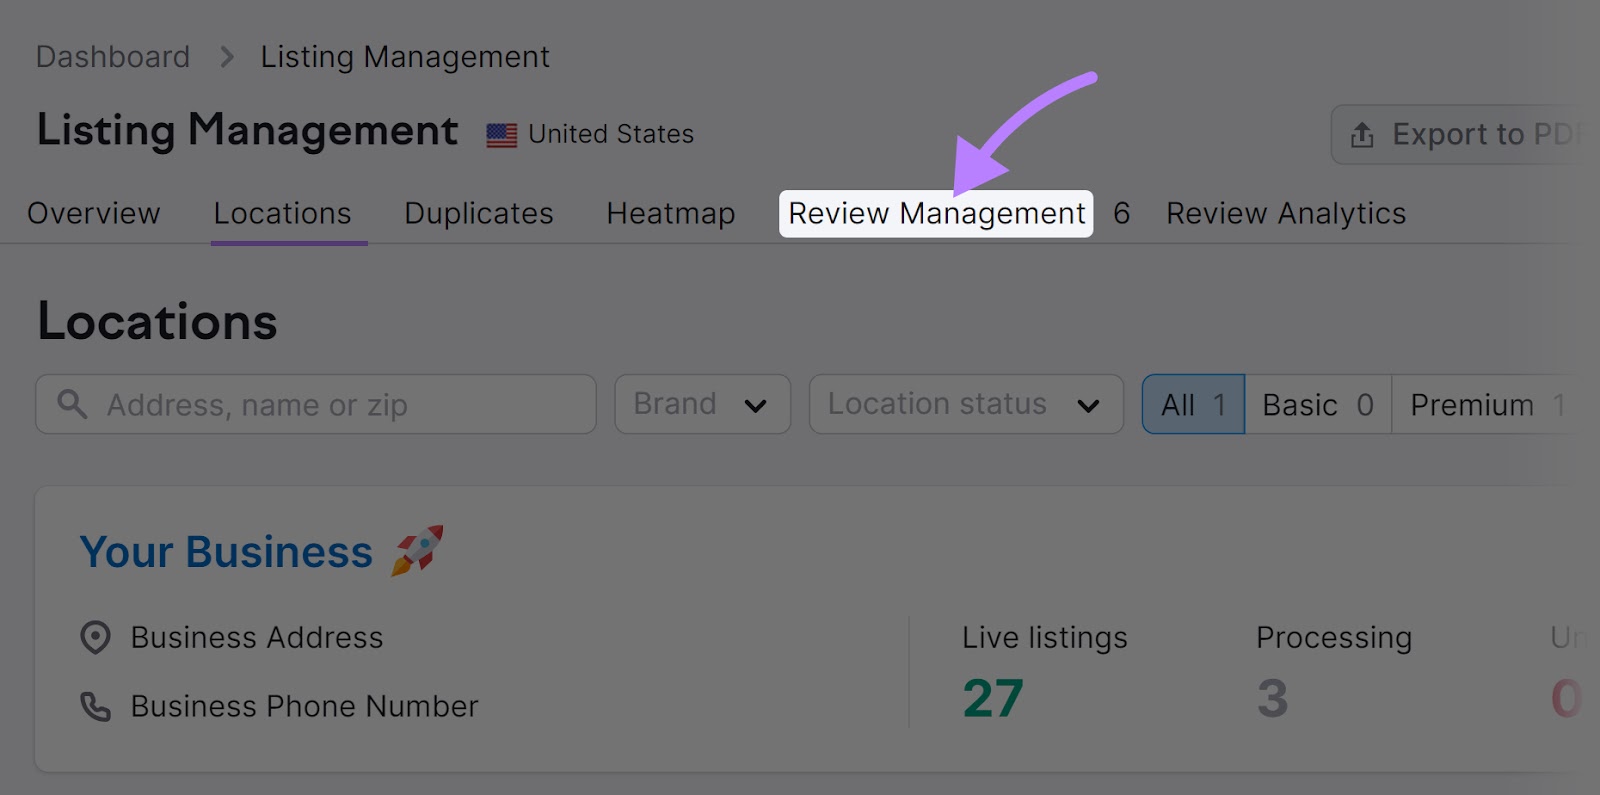 ”Review Management” tab